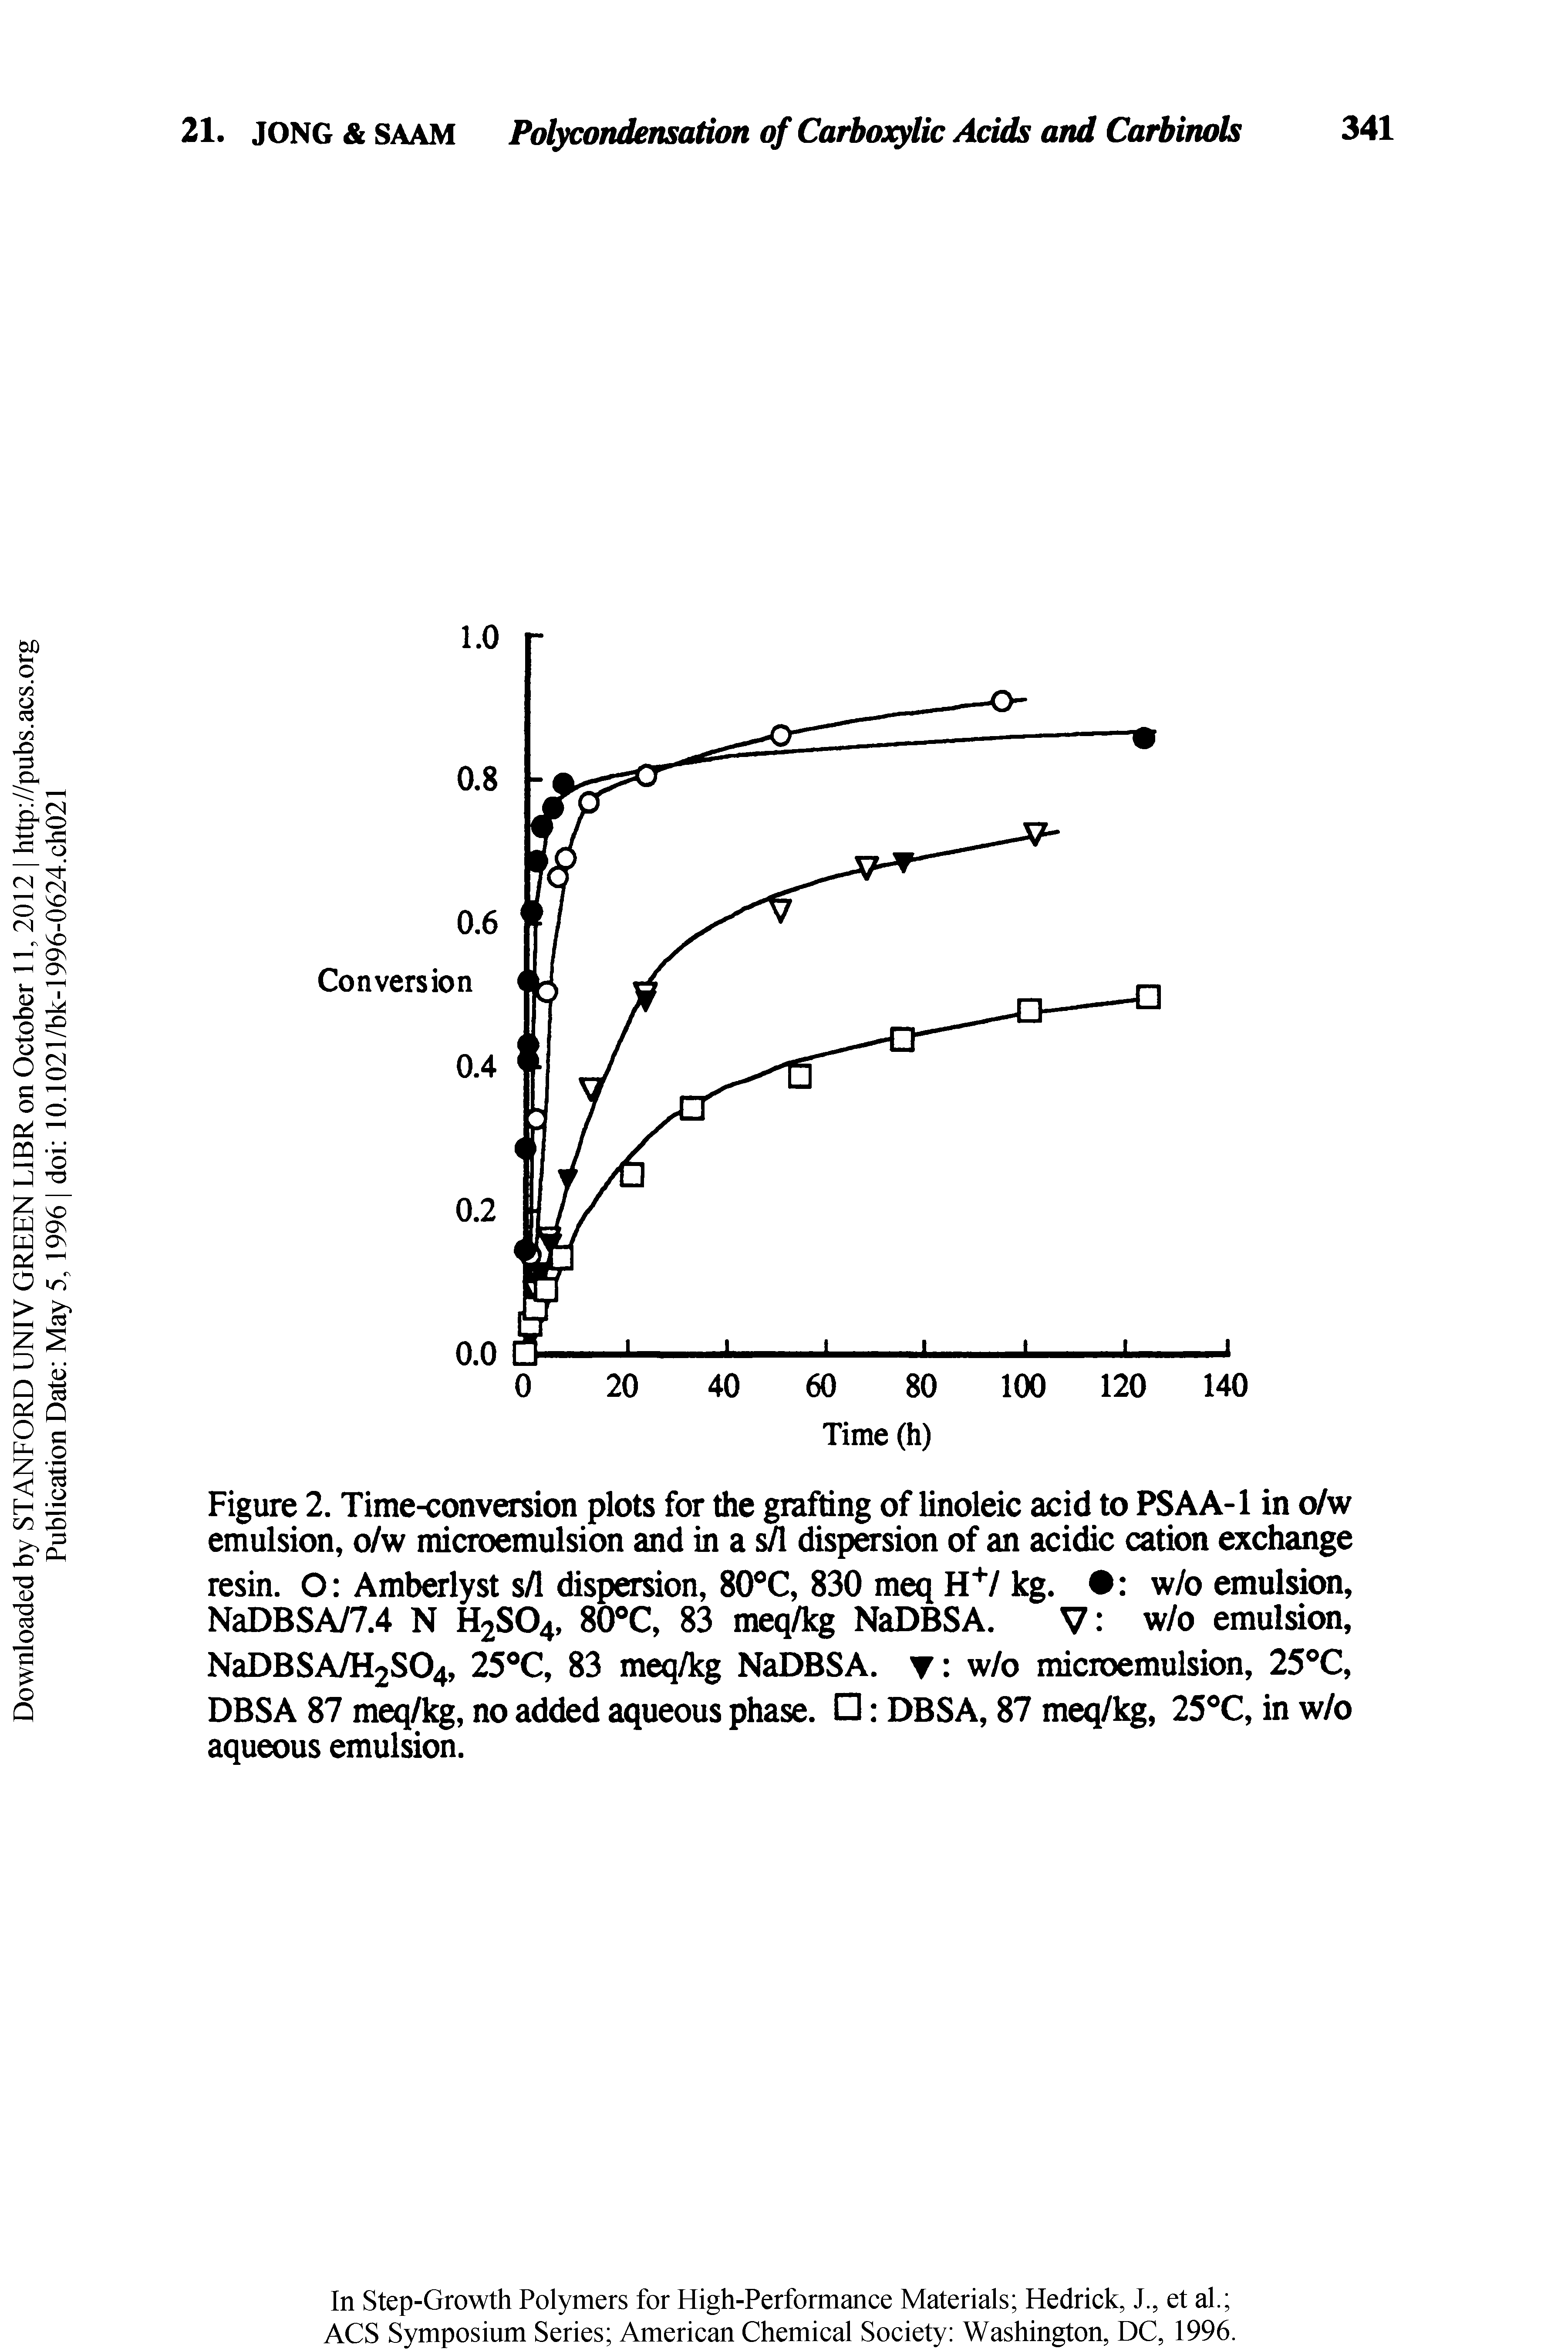 Figure 2. Time-conversion plots for the grafting of linoleic acid to PSAA-1 in o/w emulsion, o/w microemulsion and in a dispersion of an acidic cation exchange resin. O Amberlyst s/1 dispersion, 80 C, 830 meq H / kg. w/o emulsion, NaDBSA/7.4 N H2SO4, 80 C, 83 meq/kg NaDBSA. V w/o emulsion, NaDBSA/H2S04, 25 C, 83 meq/kg NaDBSA. t w/o microemulsion, 25 C, DBSA 87 meq/kg, no added aqueous phase. DBSA, 87 meq/kg, 25°C, in w/o aqueous emulsion.